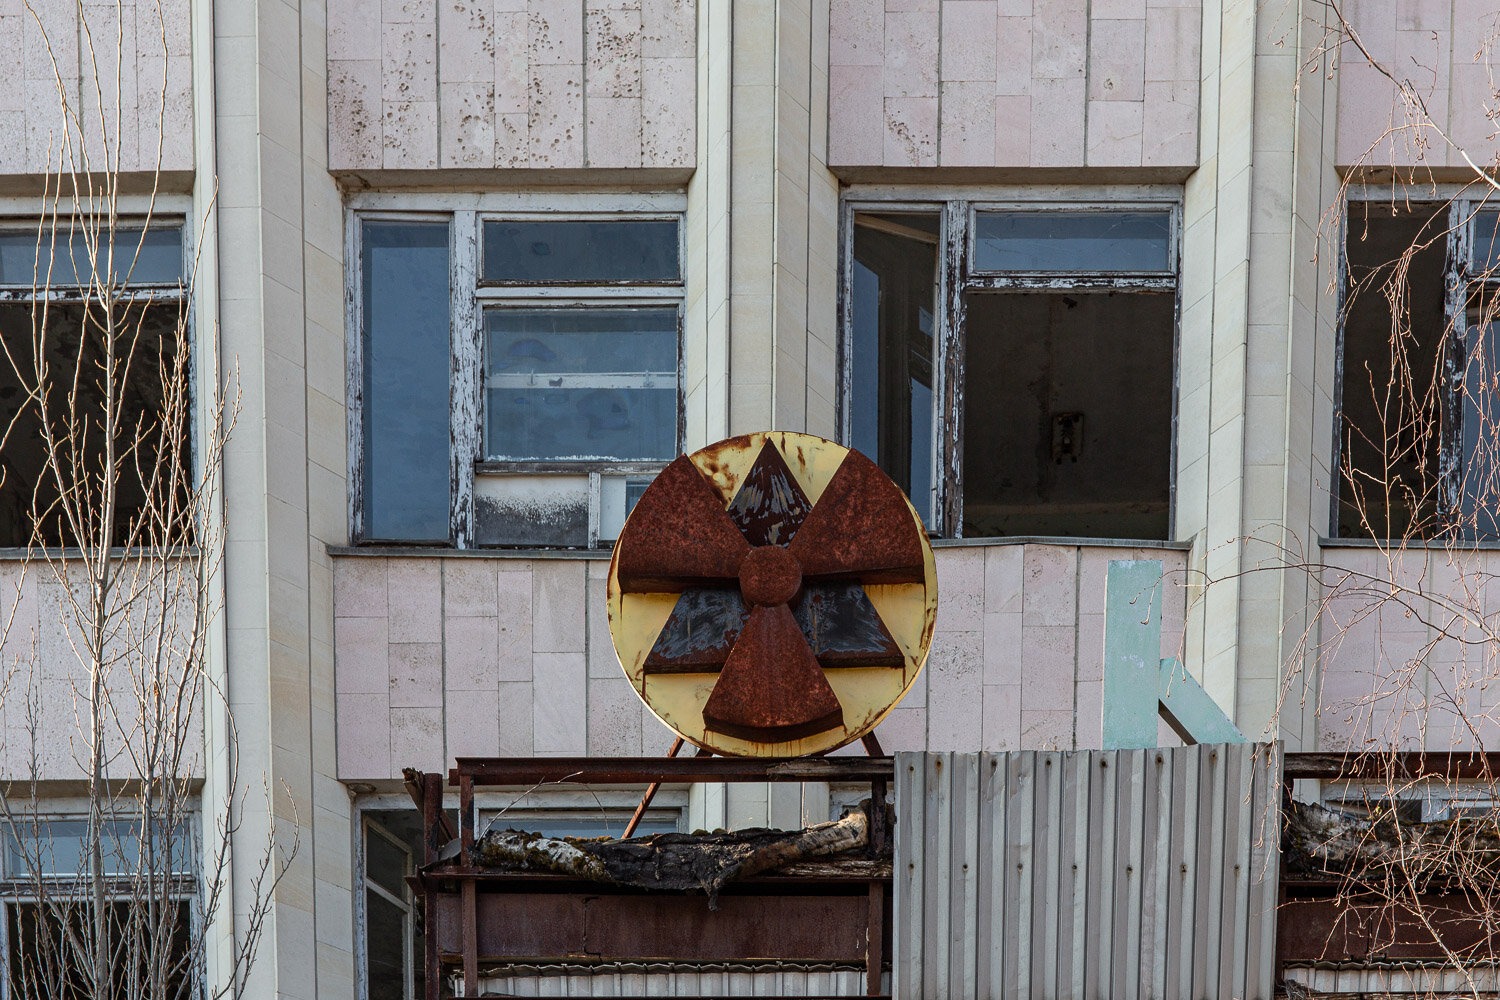 Main building in Pripyat with black and yellow radiation symbol